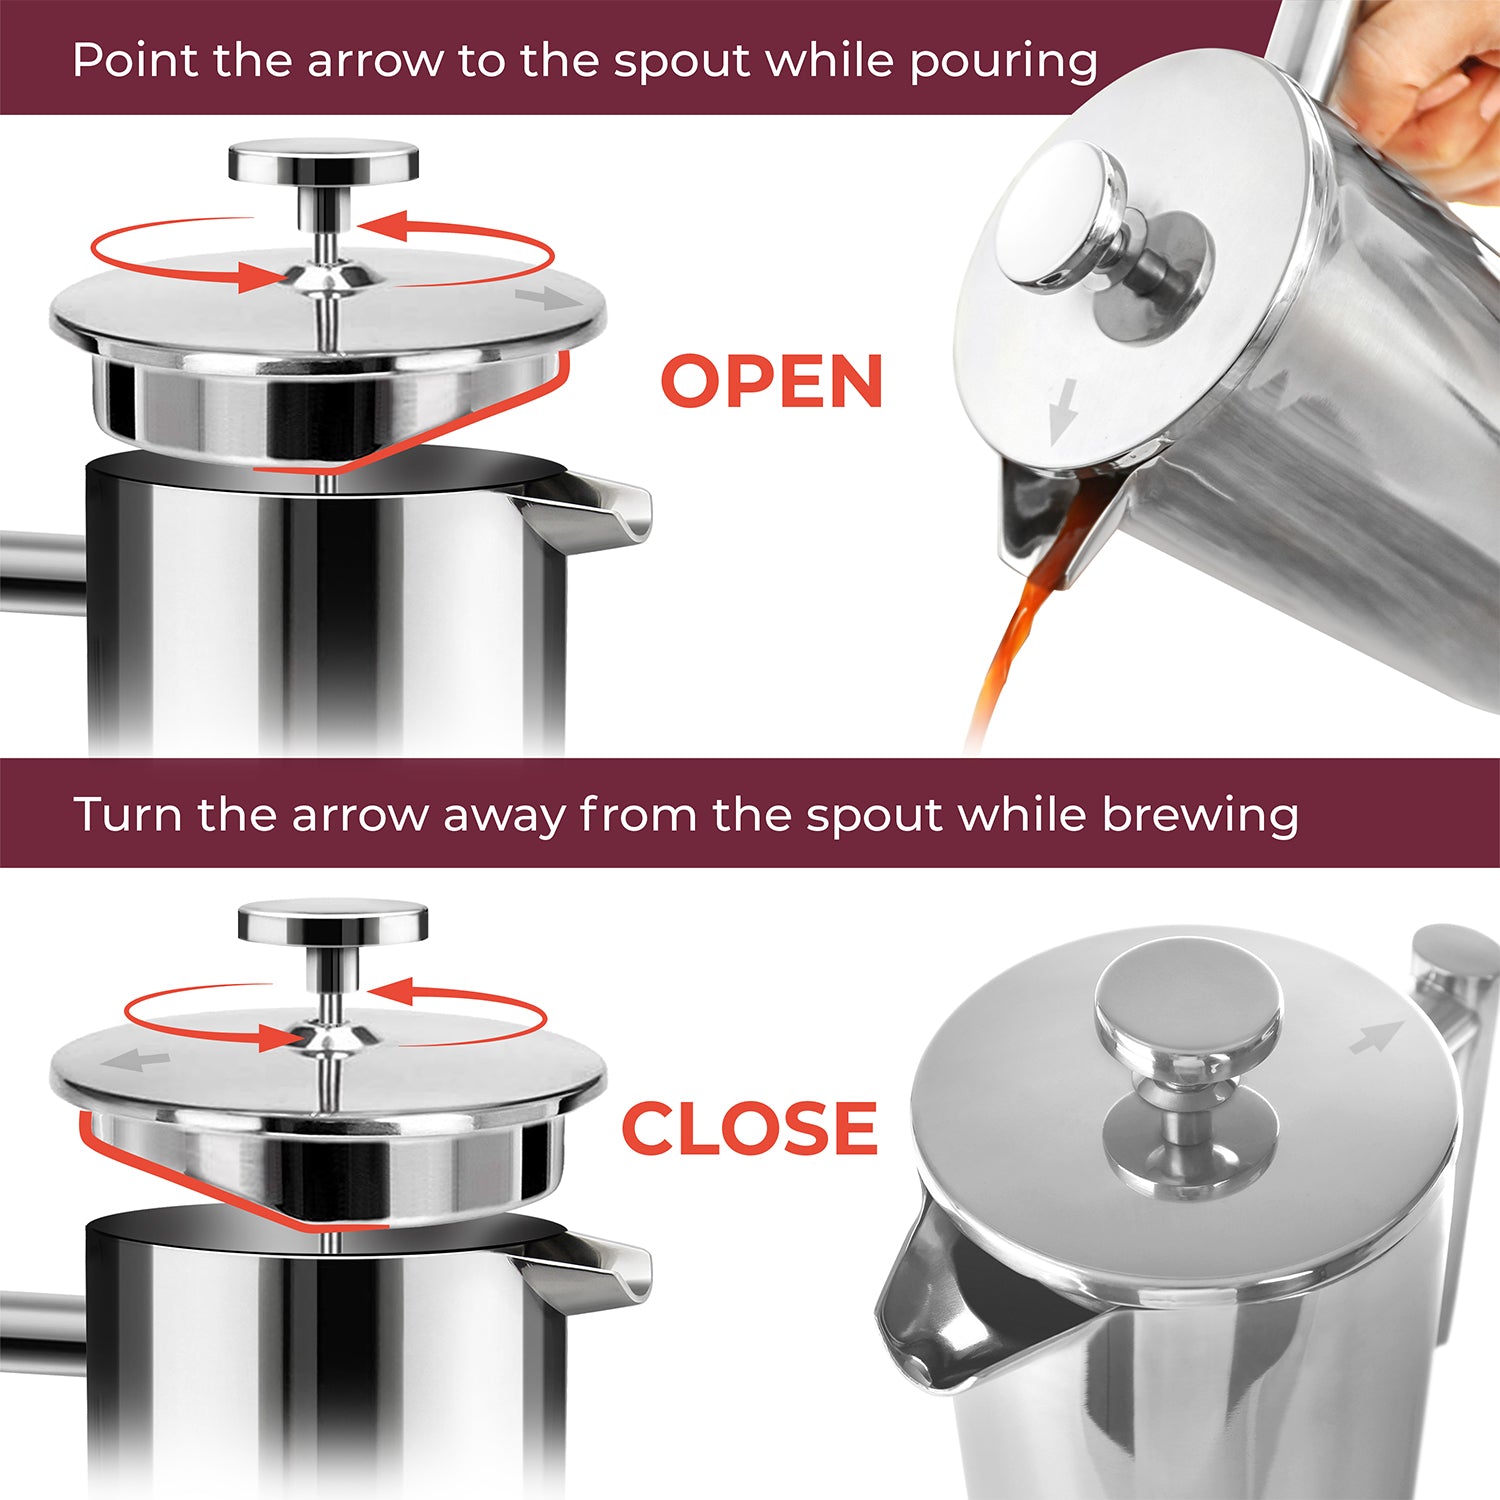 Coffee Press (often called the French Press) - Len's Coffee LLC